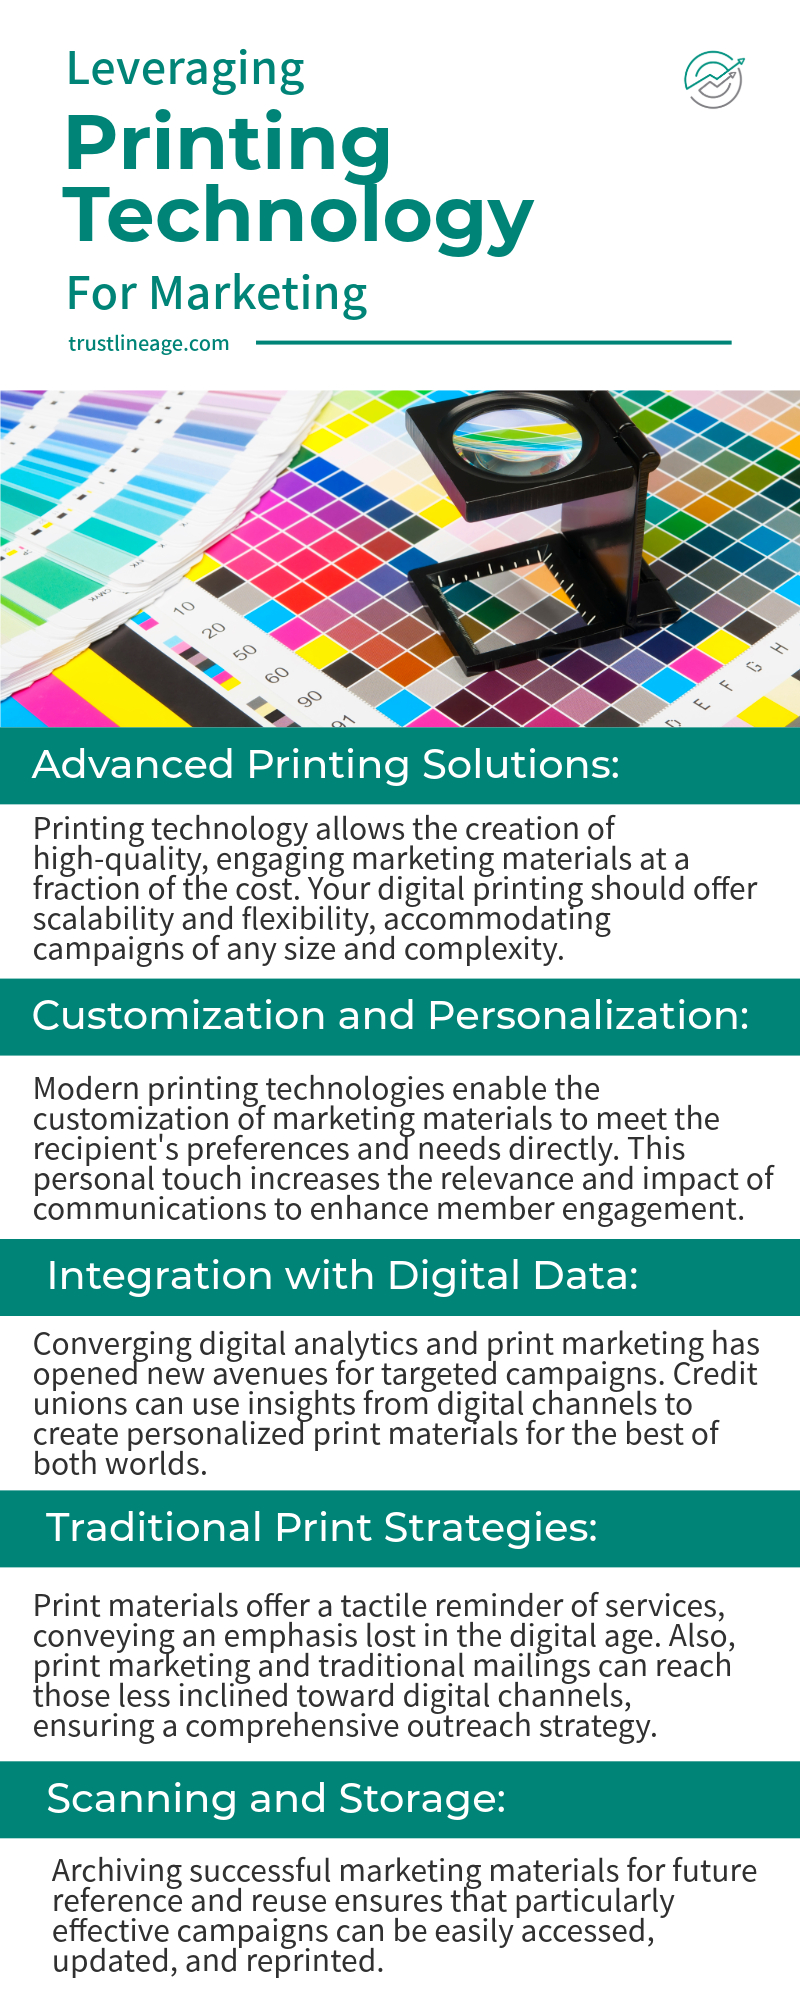 Using Printing Technology to Share Marketing Materials to Advertise Services